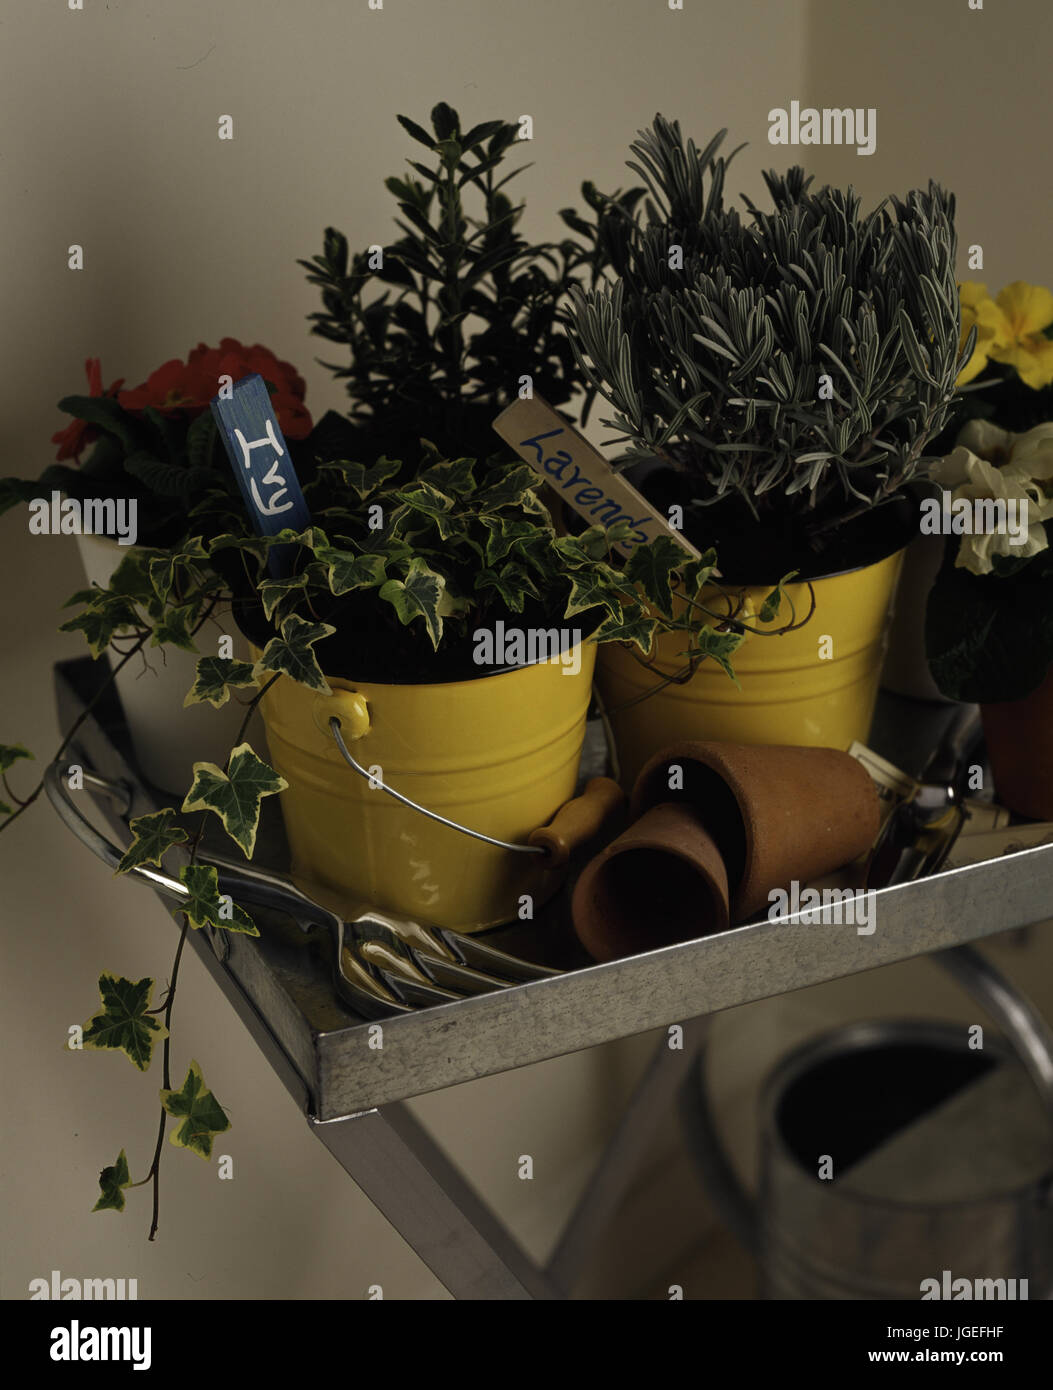 Ivy and lavender in yellow pots on galvanised metal tray table Stock Photo